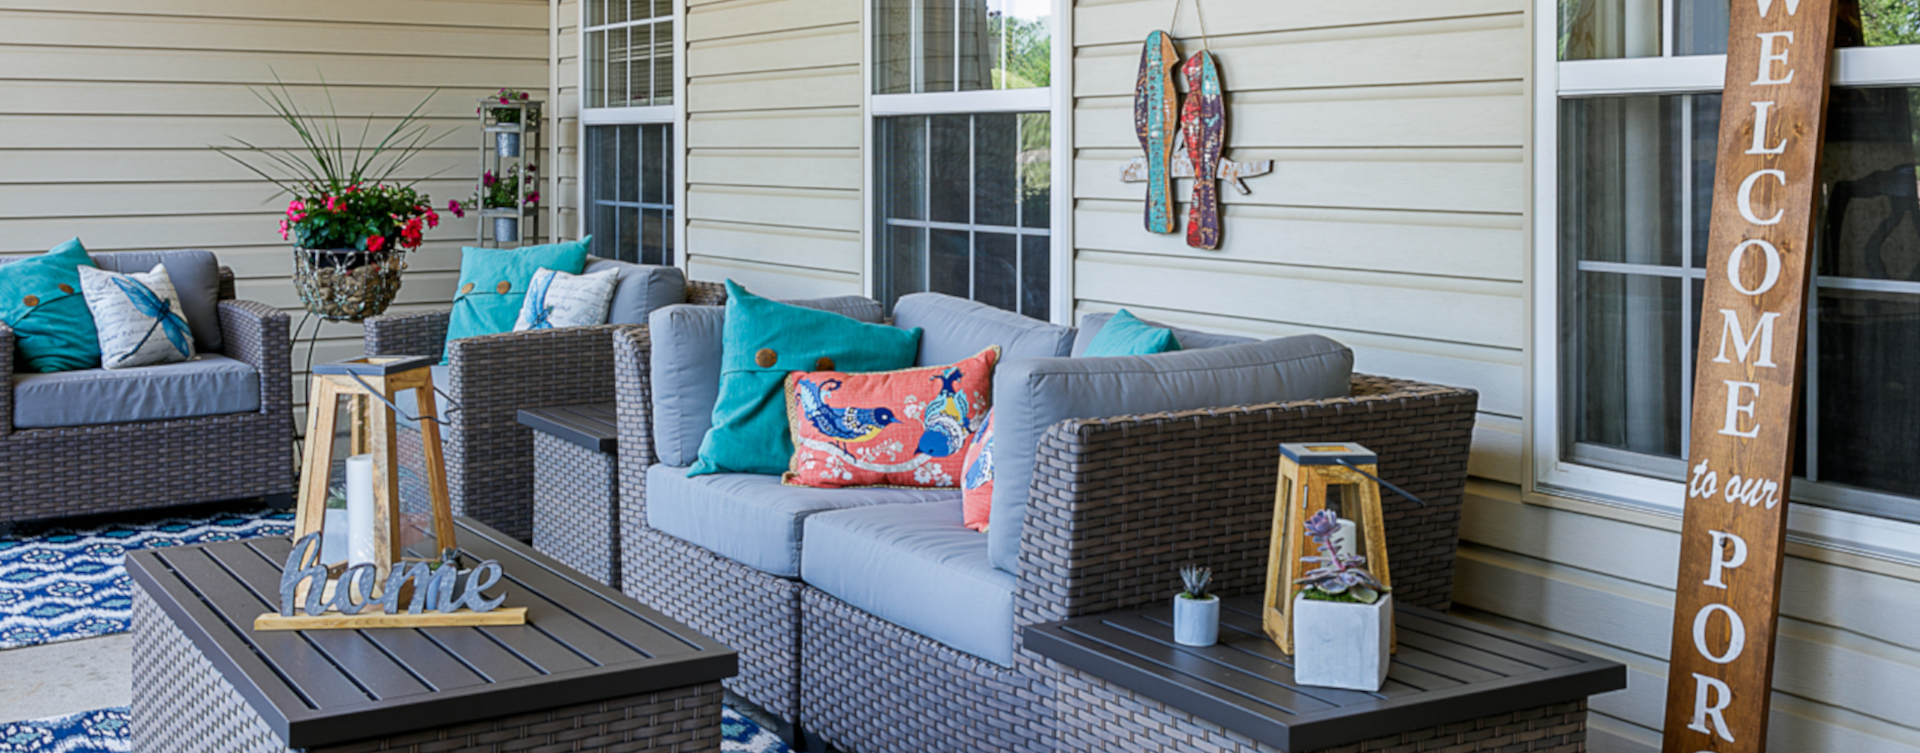 Sip on your favorite drink on the porch at Bickford of Sioux City